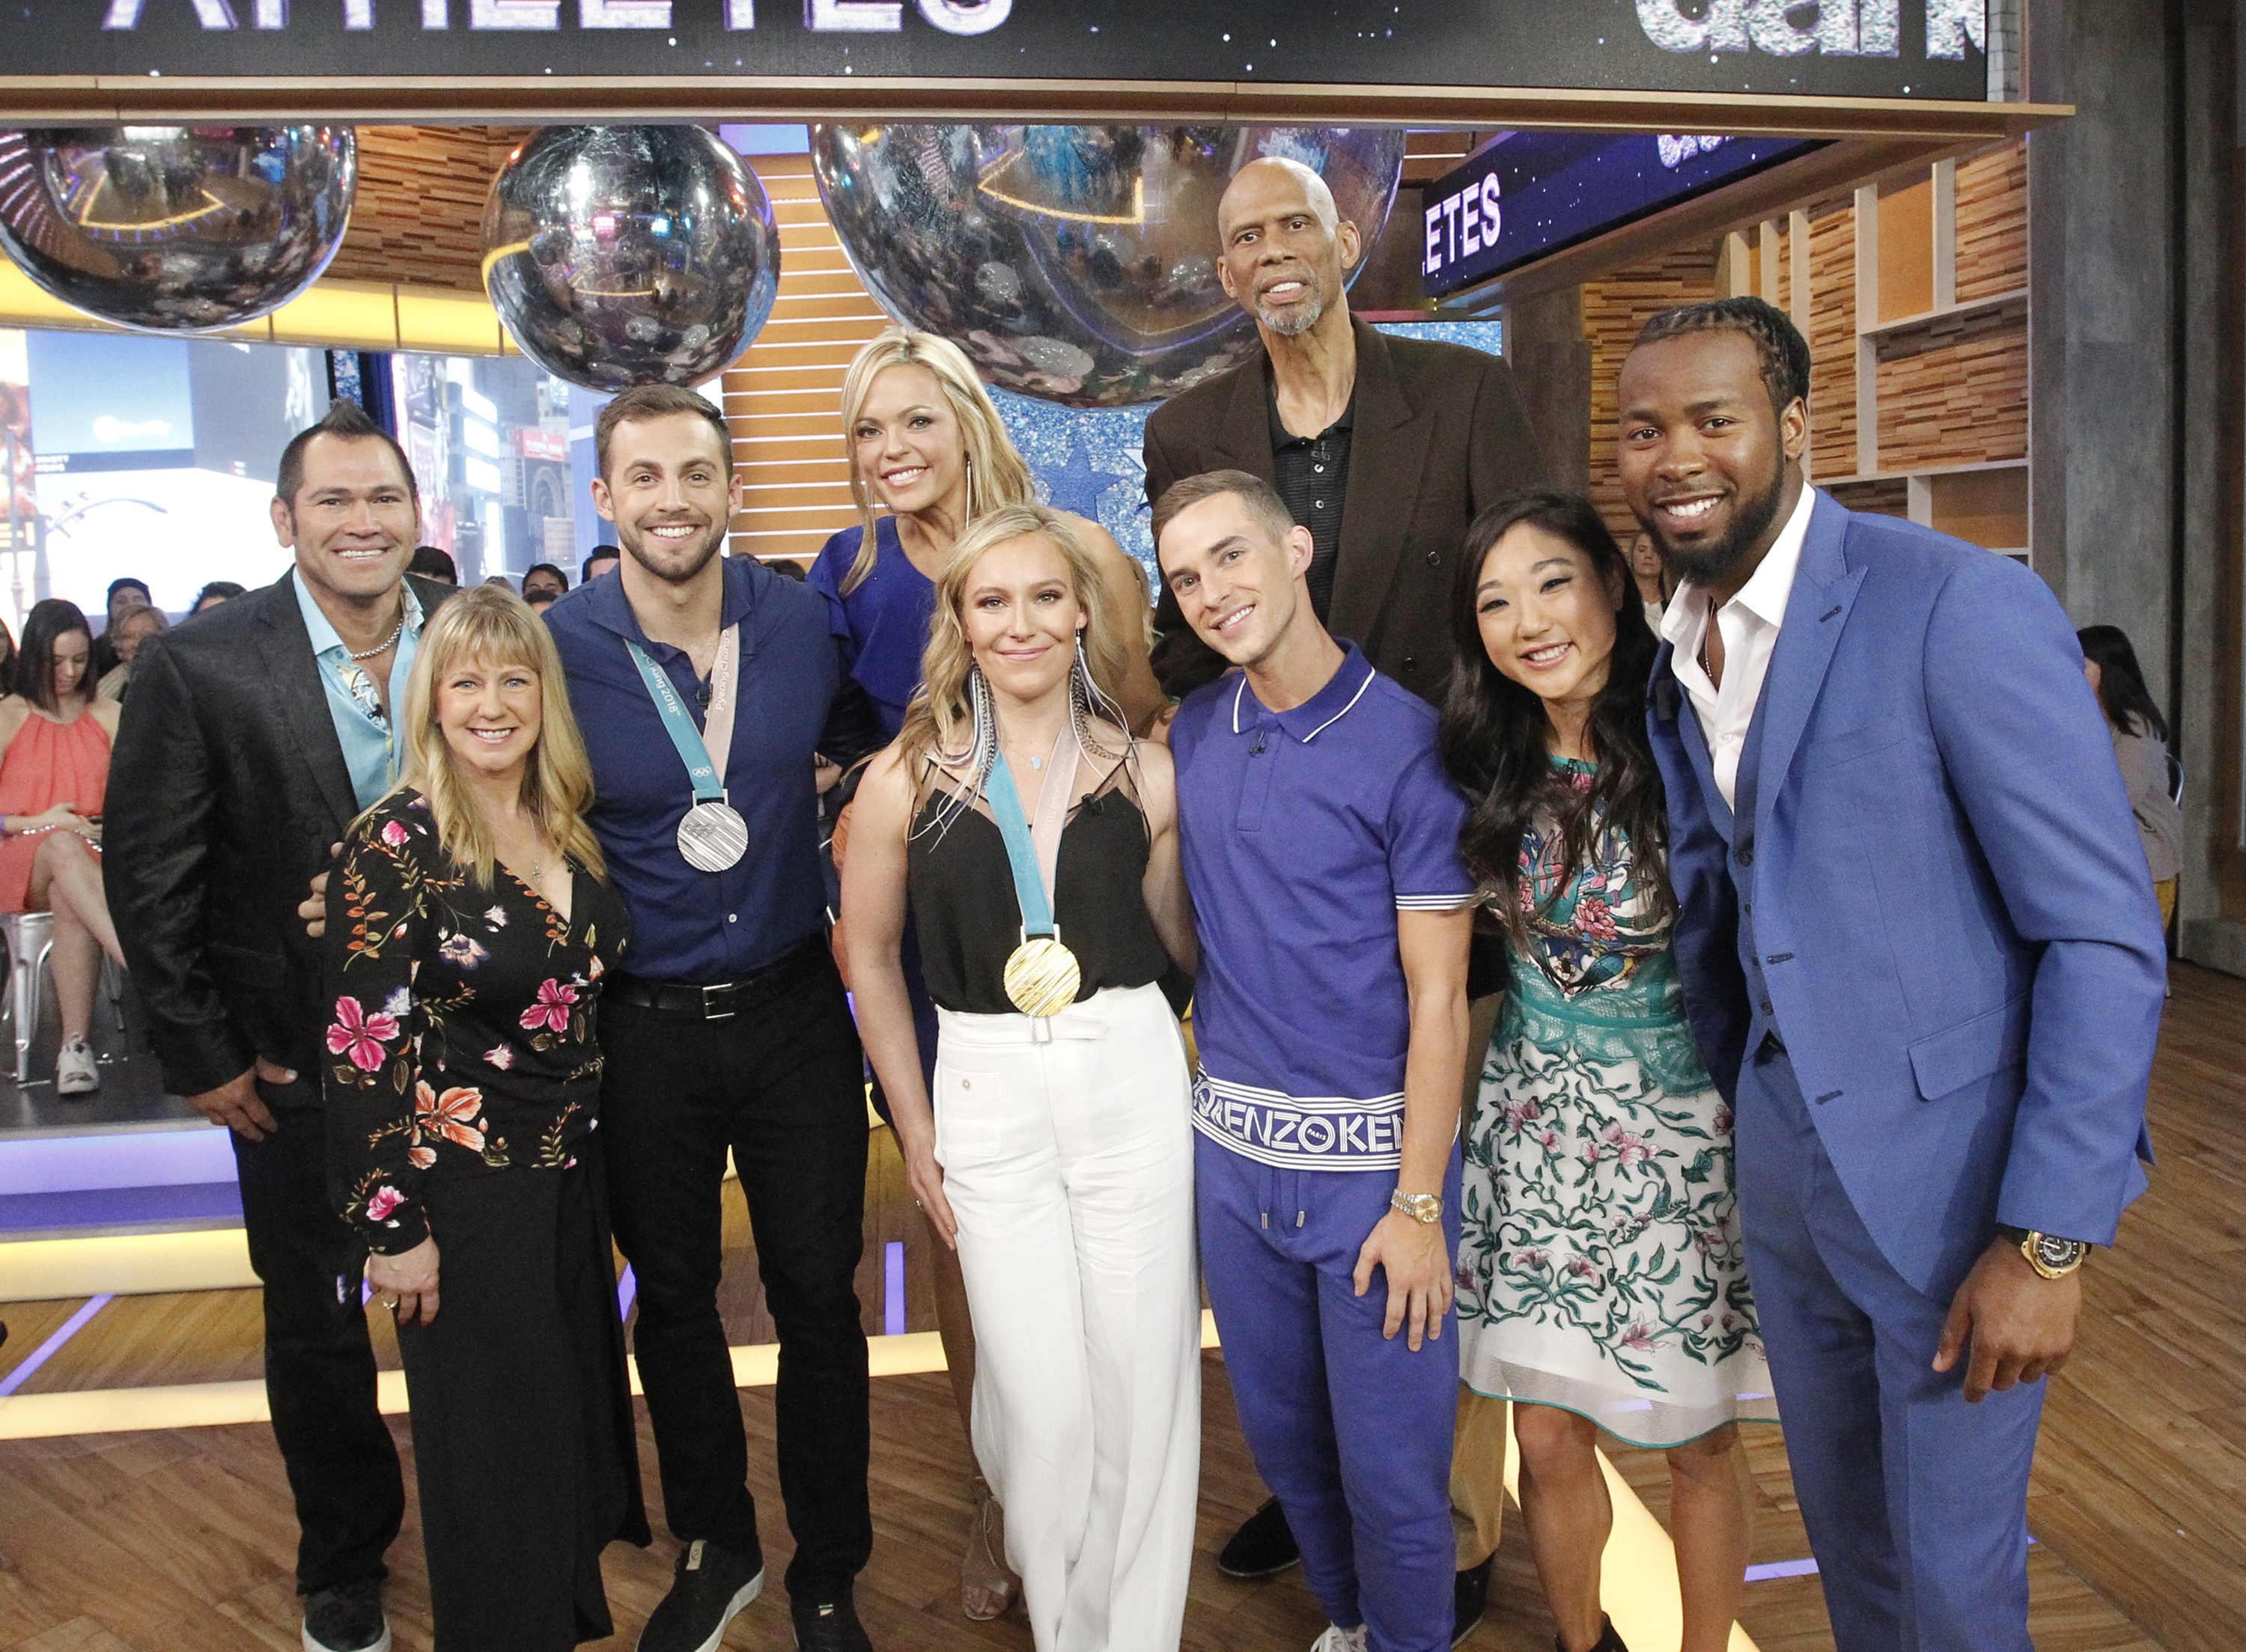 When Does DWTS Season 26 Start? Learn All About the 2018 Show!